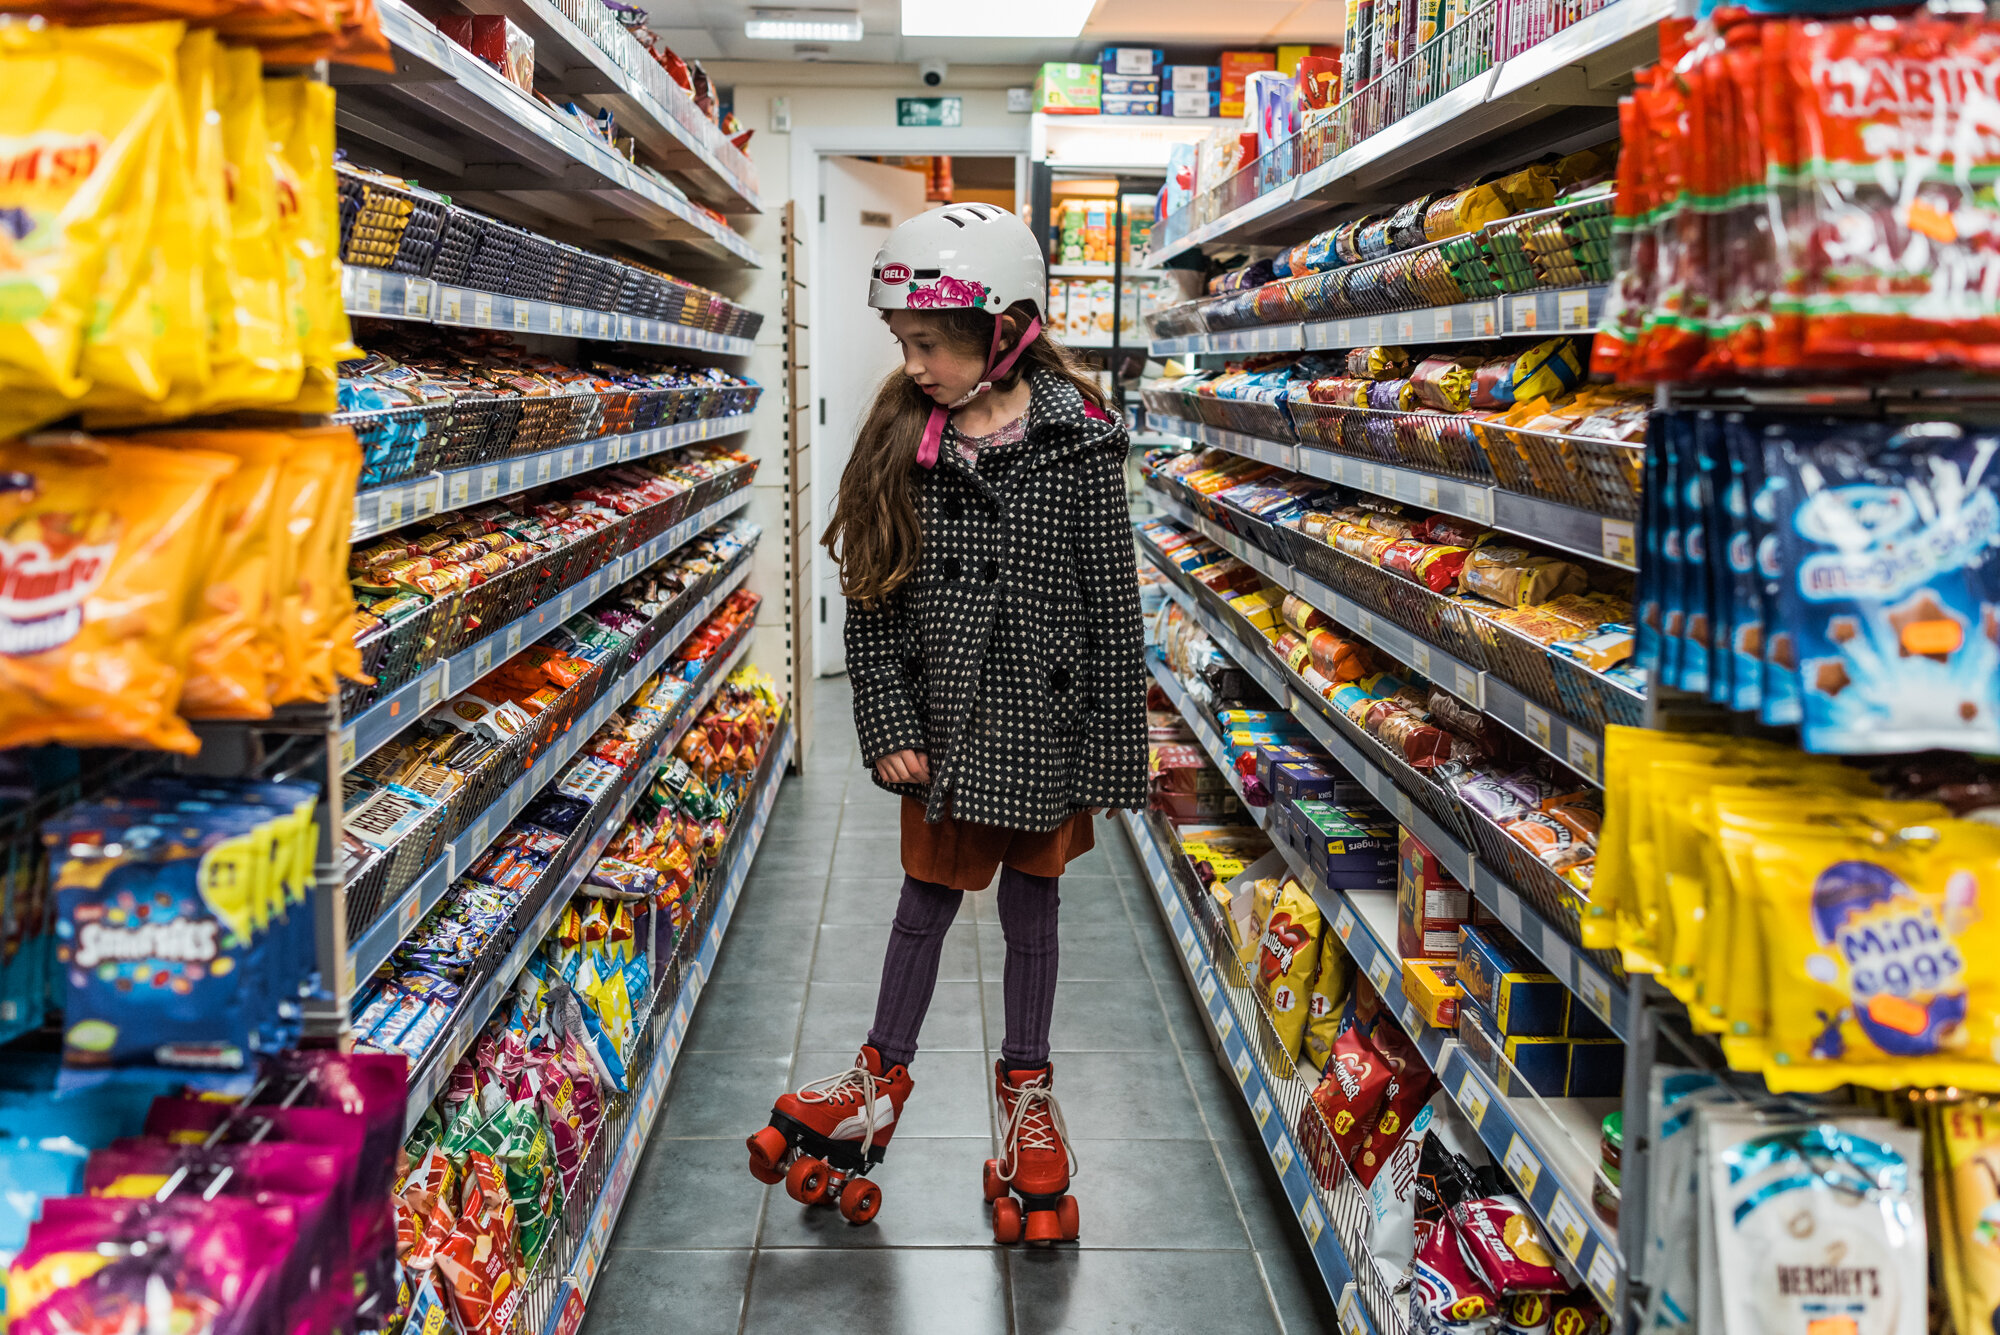  A young girl in pink roller skates and helmet stands in the aisle of a newsagent shop, looking at the rows of sweets and chocolates around her. 